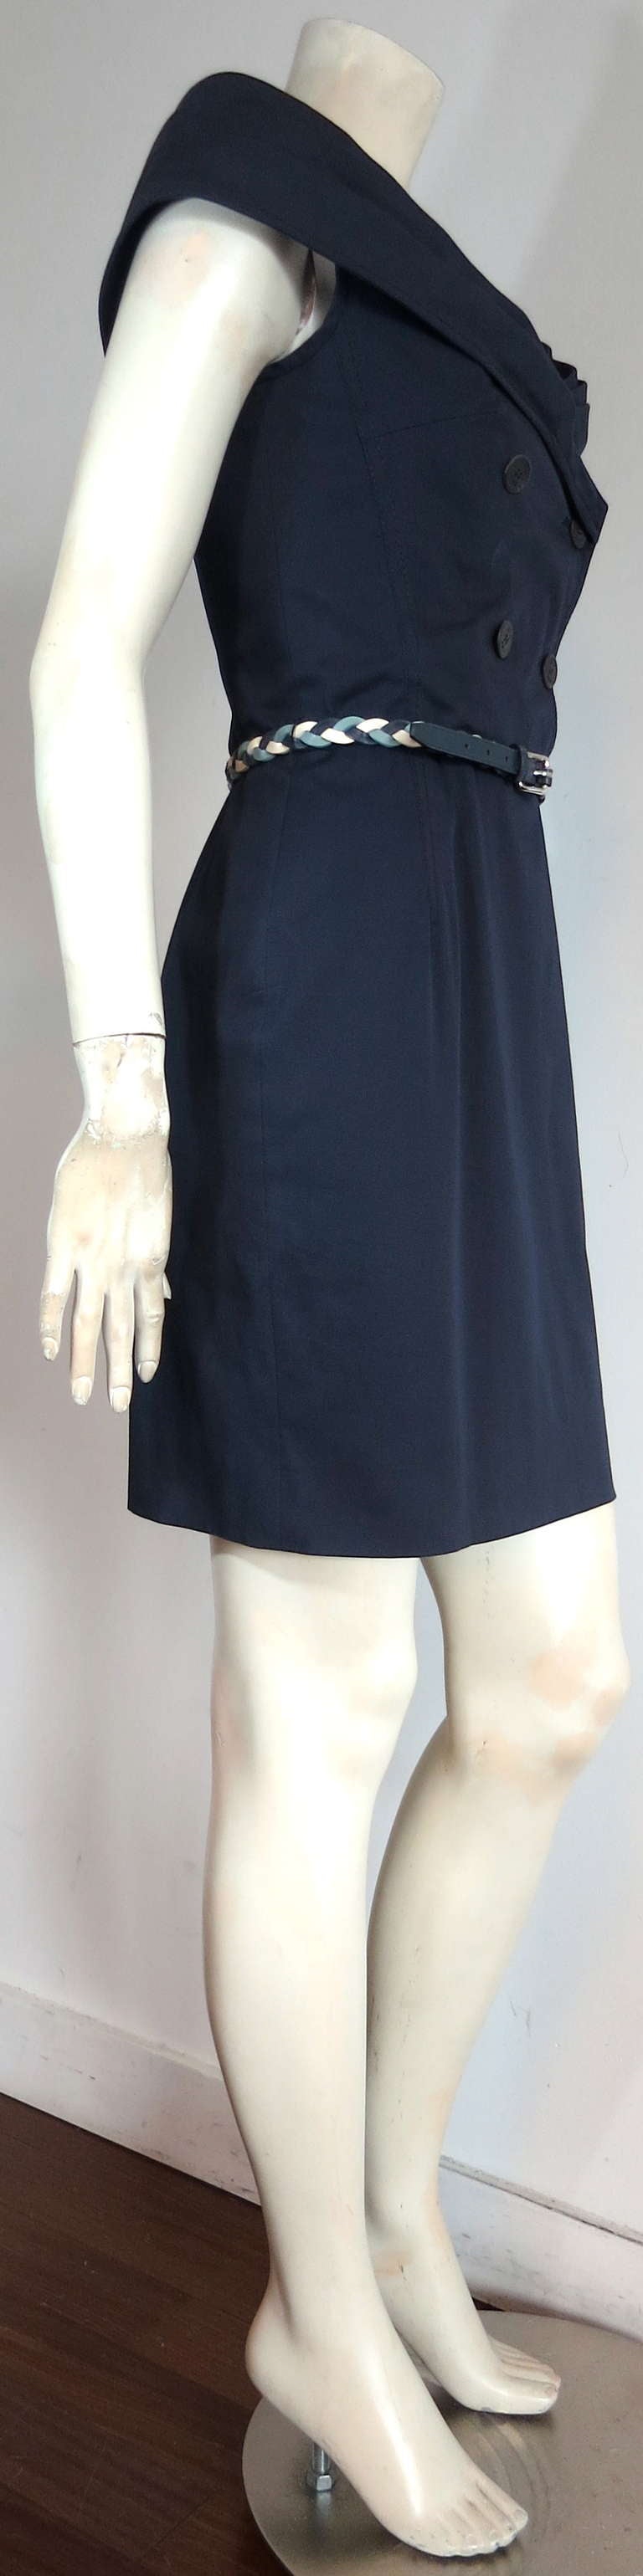 CHRISTIAN DIOR Portrait collar day dress & leather belt In Excellent Condition For Sale In Newport Beach, CA